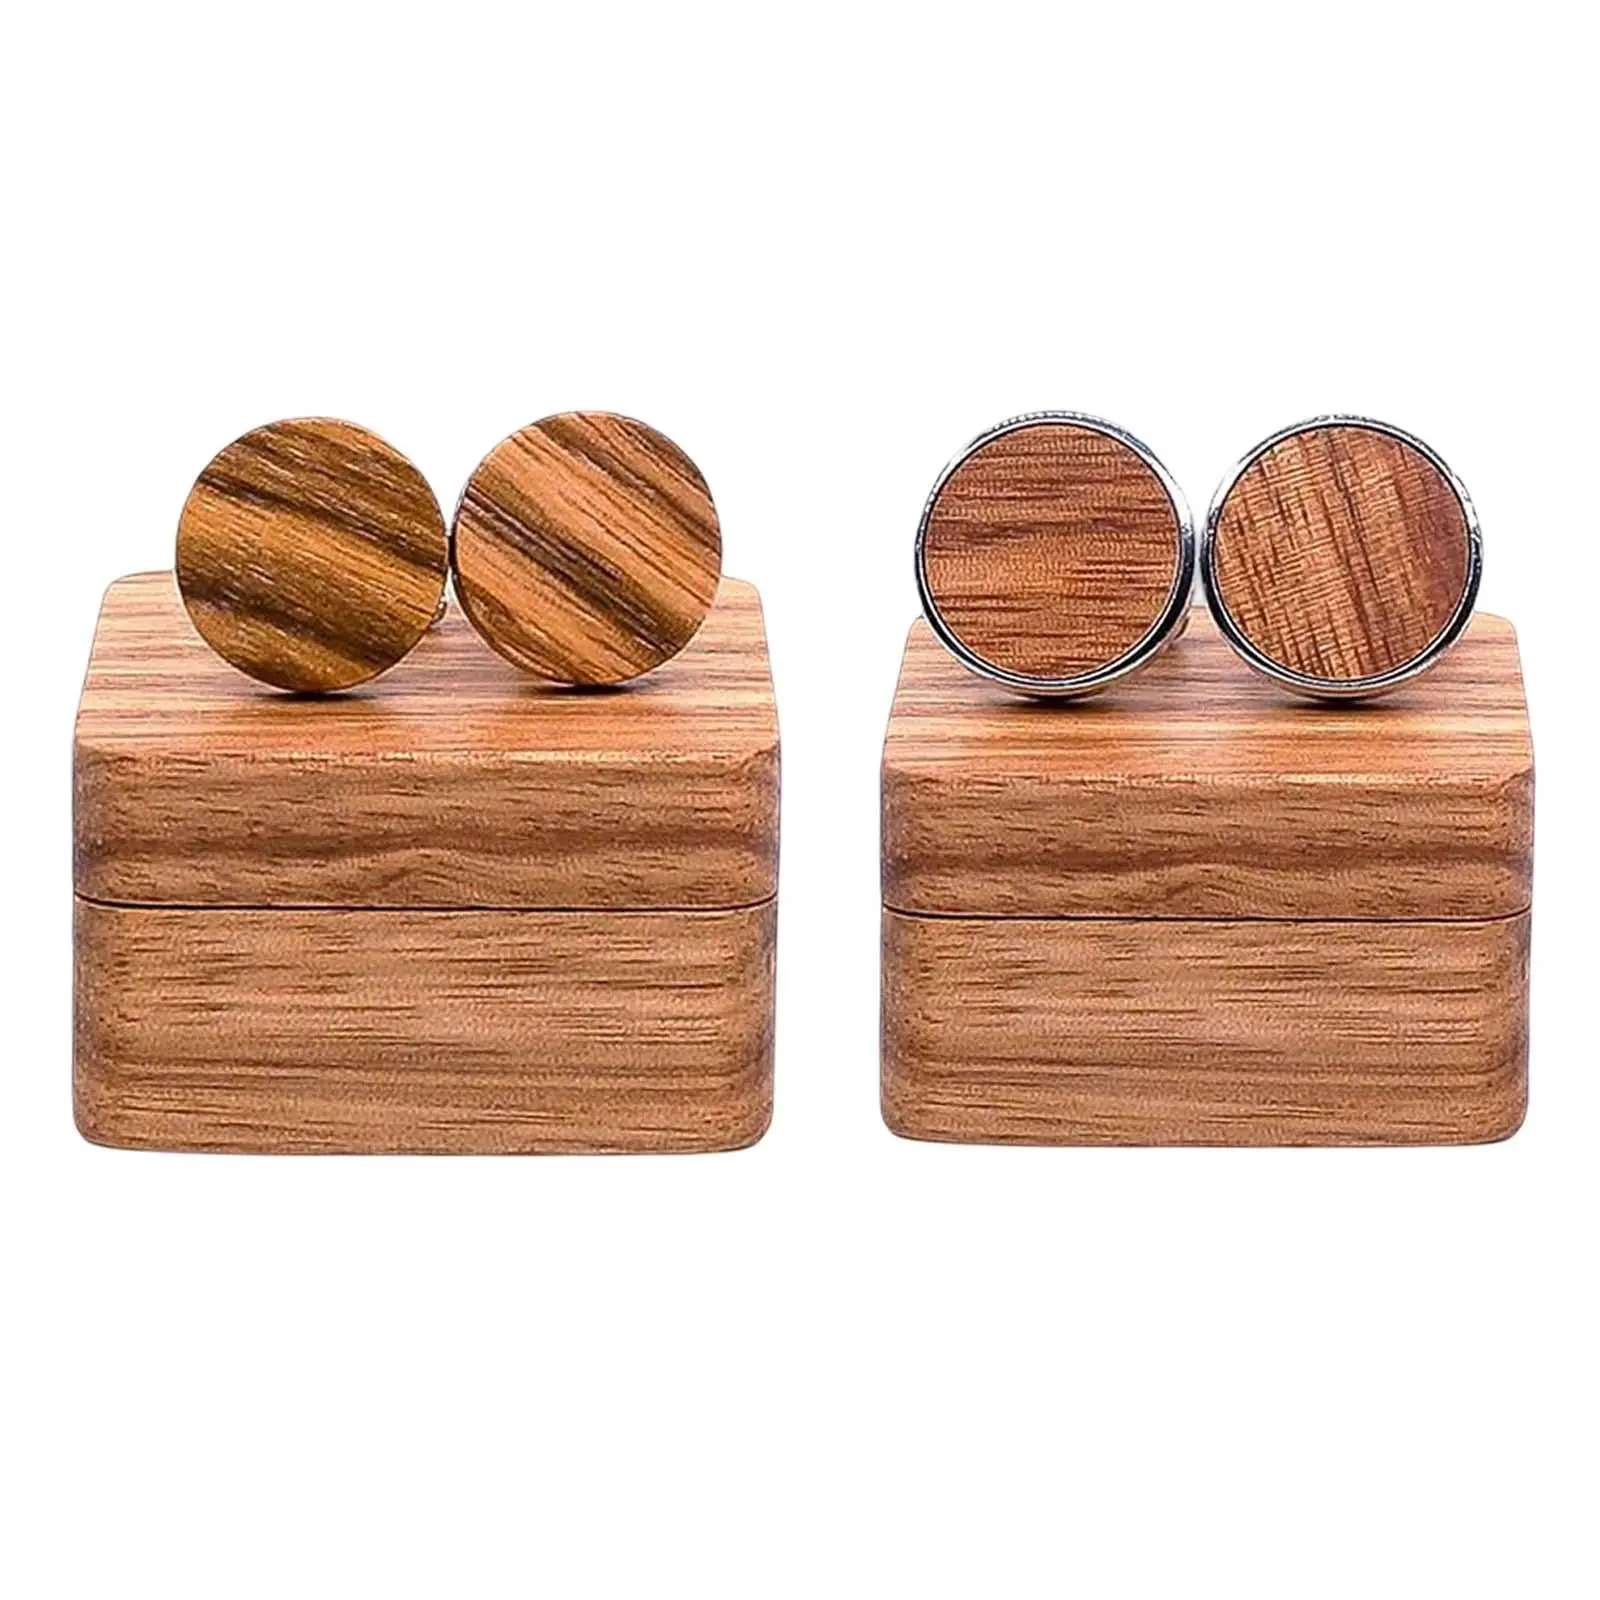 

Rustic Wooden Round Cufflinks with Organizer Box Handsome Cuff Links for Bussiness Men Husband Wedding Gifts